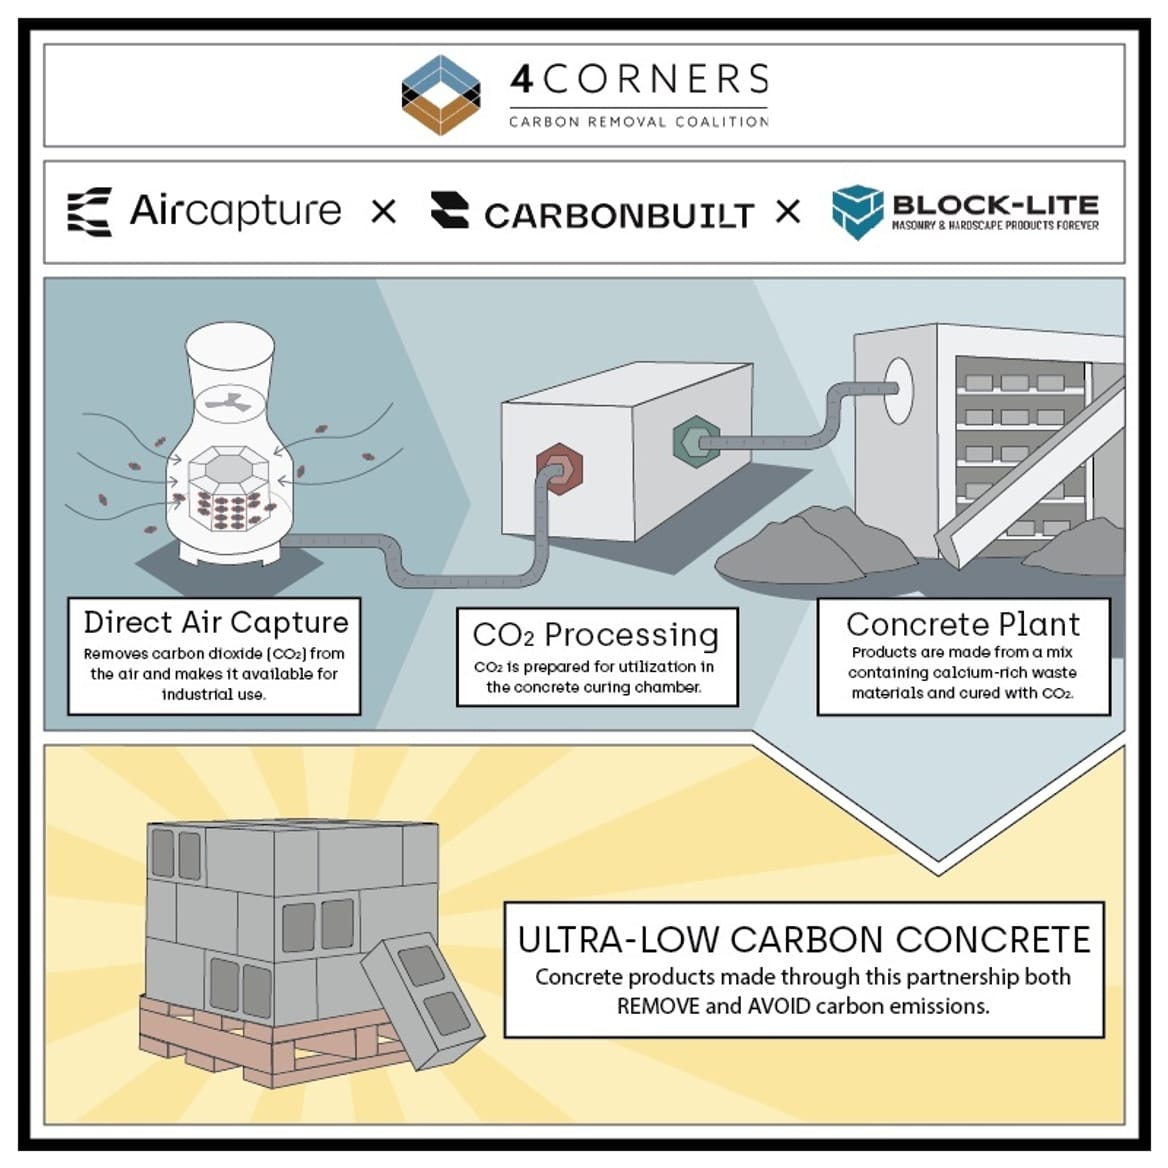 An infographic showing the steps in the coalition's manufacturing process to make lower-carbon concrete